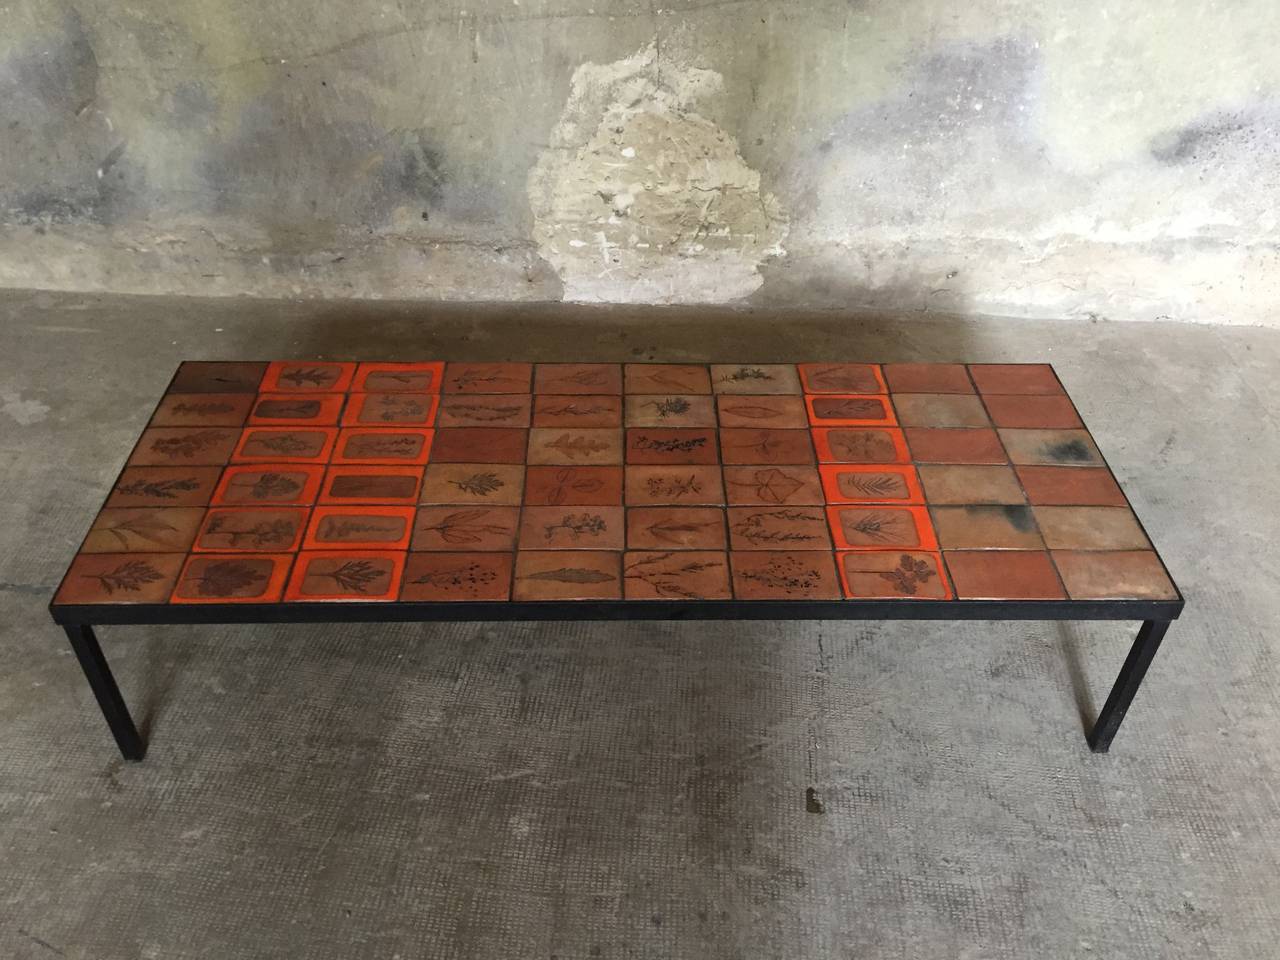 Nice coffee table by Roger Capron, circa 1960.

Dimensions: 126 X 49 X 29 cm.